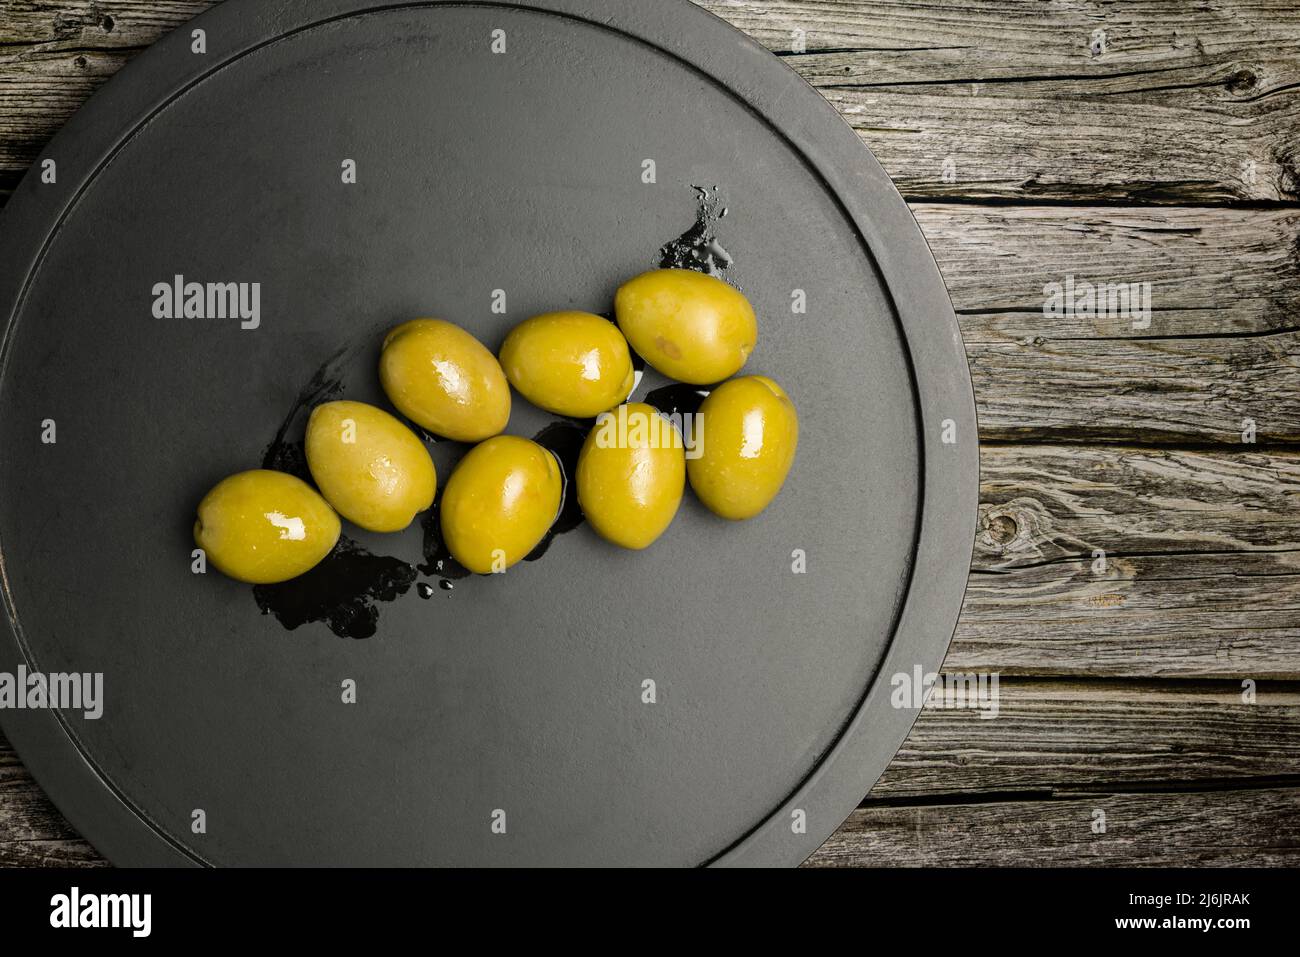 Big green olives on black plate on wooden table Stock Photo